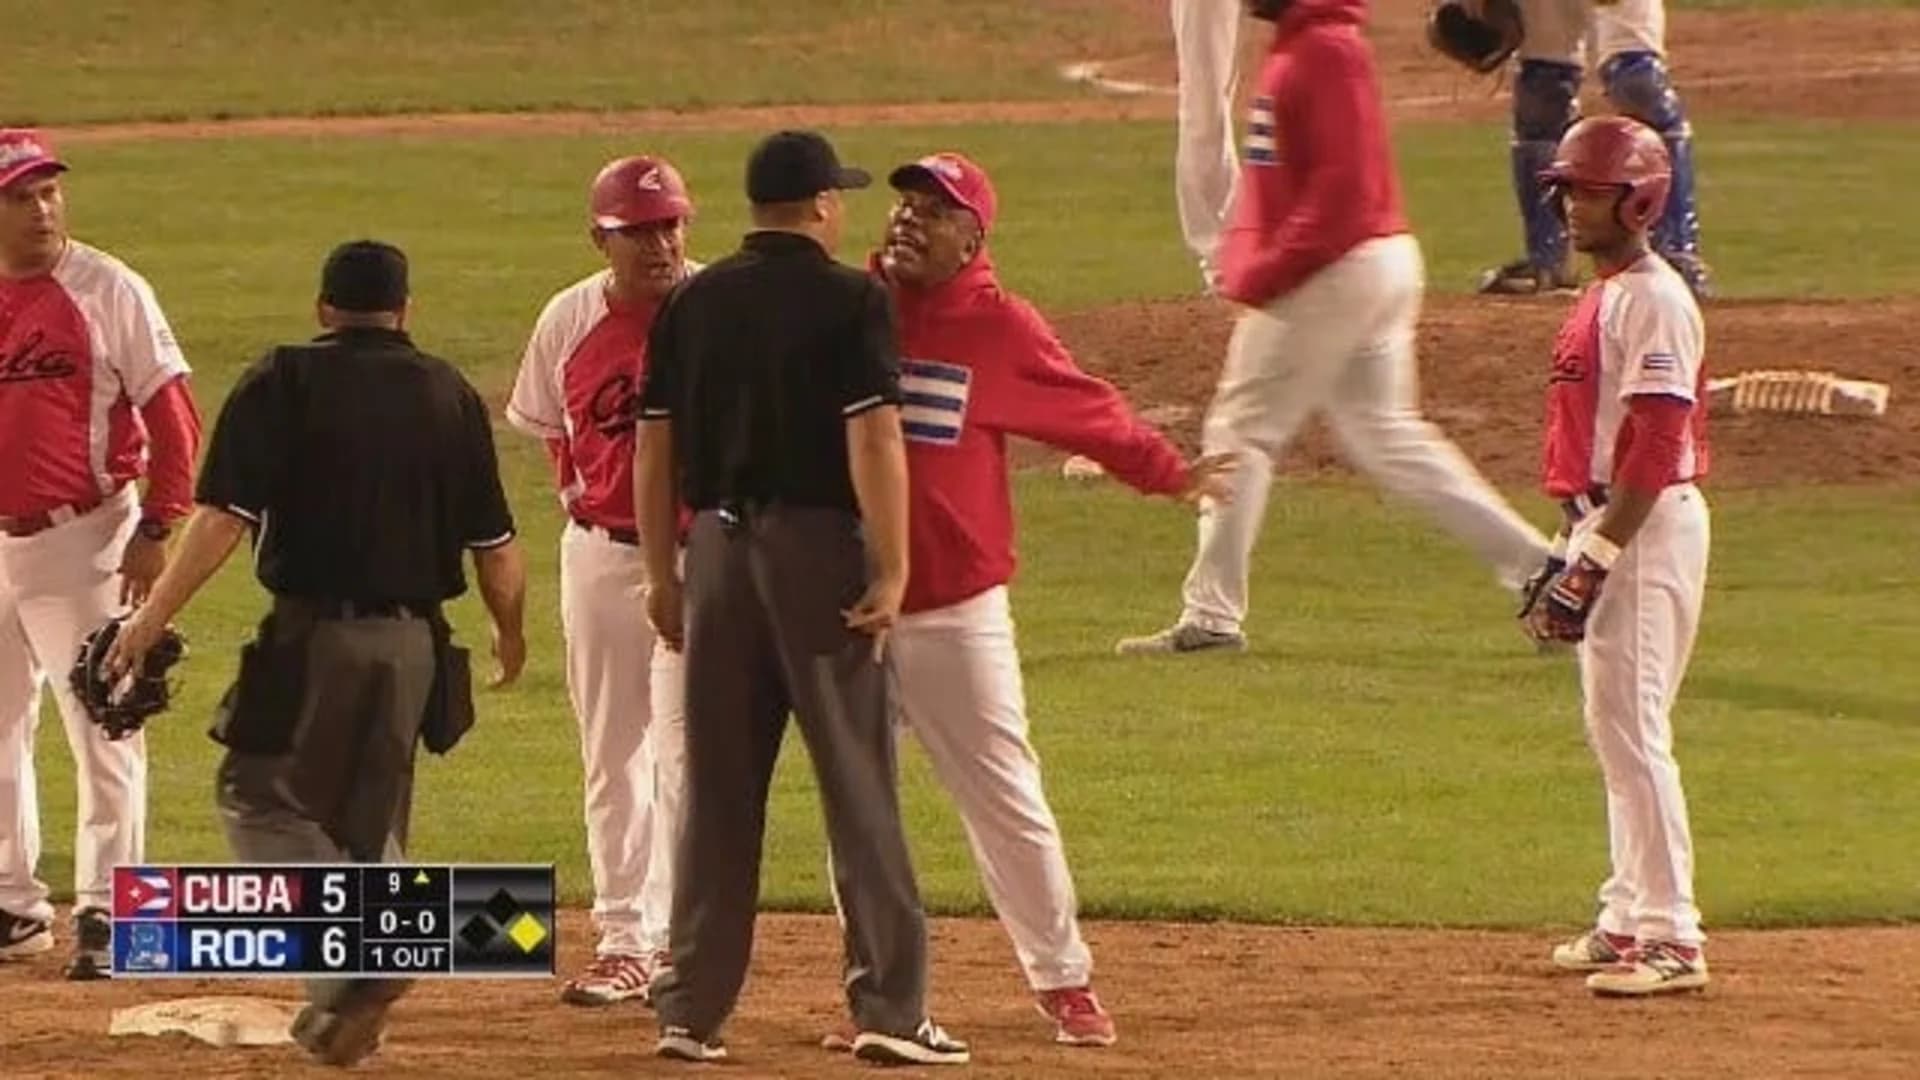 Contested play leads to bizarre finish between Boulders, Cuba